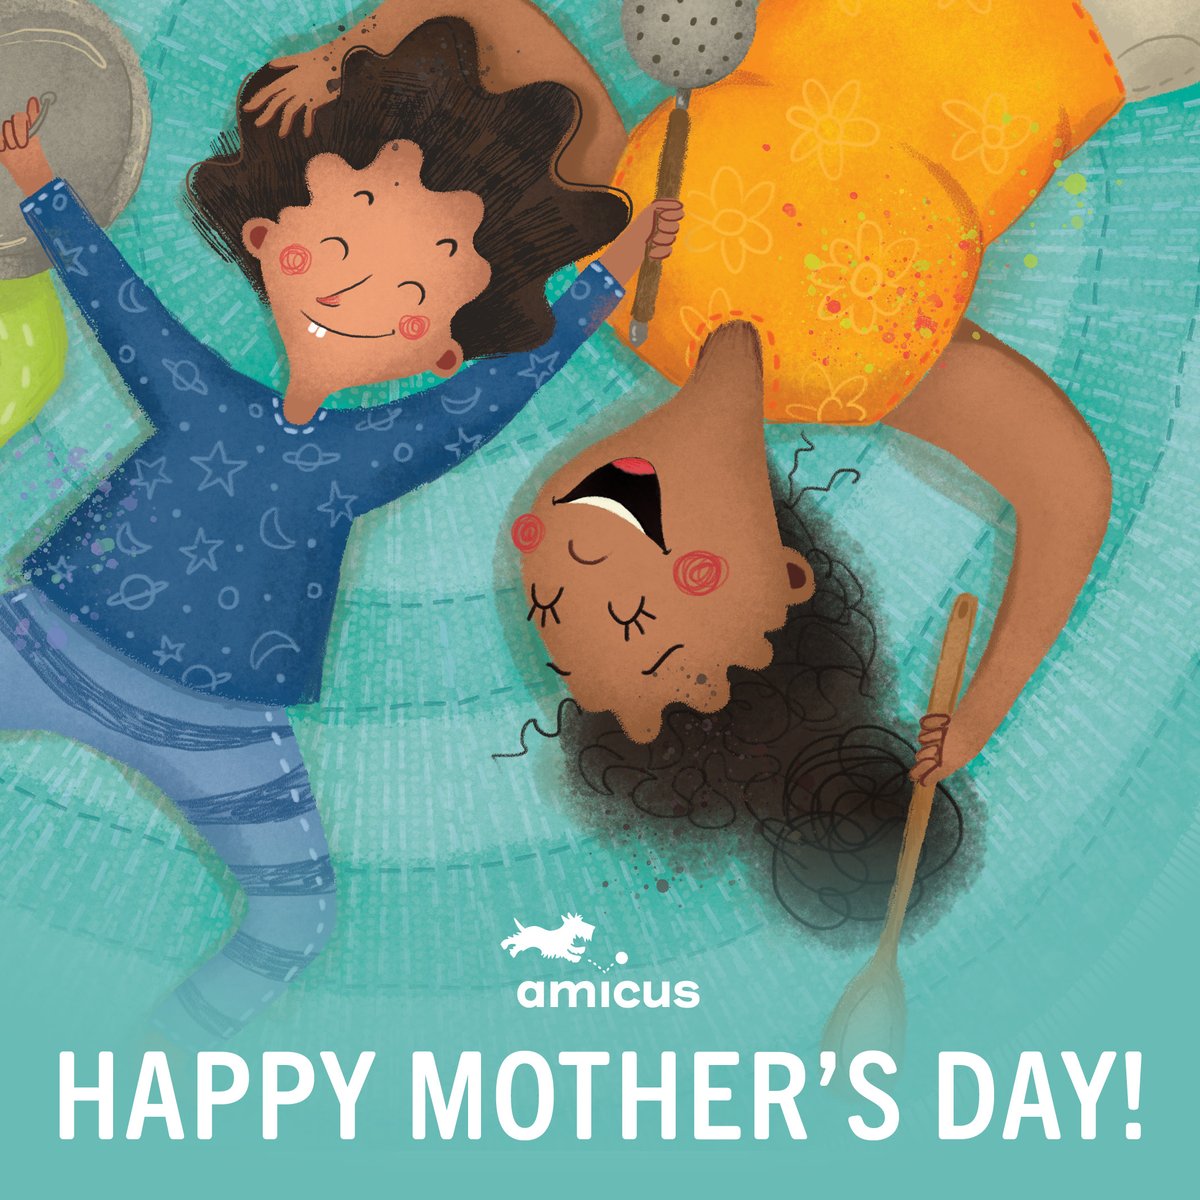 Wishing a Happy Mother's Day to all those raising future readers and future leaders. #mothersday #mothers #readersandleaders